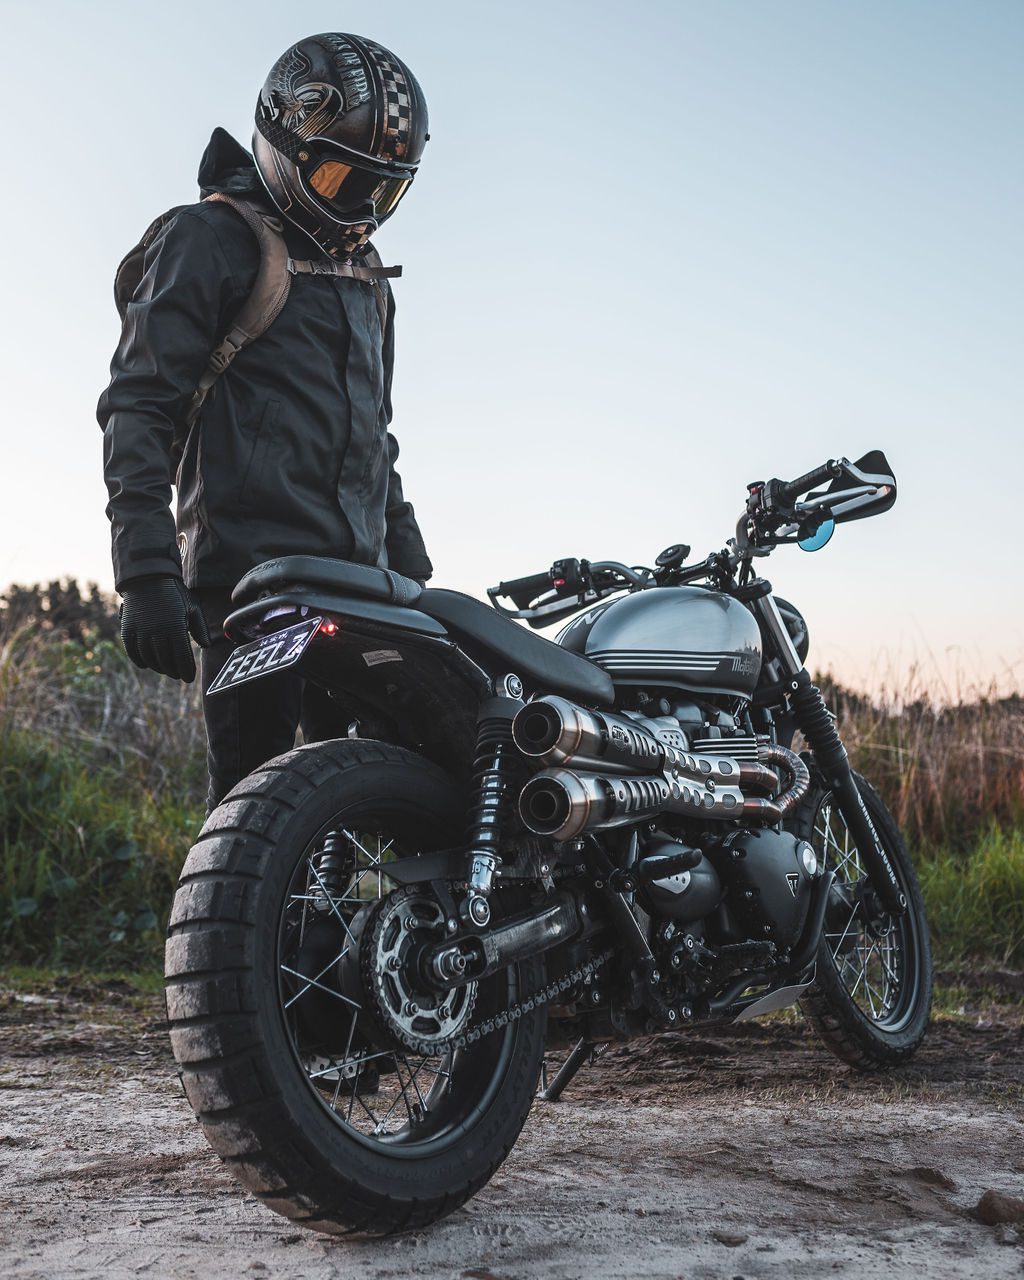 Motorcycle rider stand next to their Triumph Scrambler at dusk